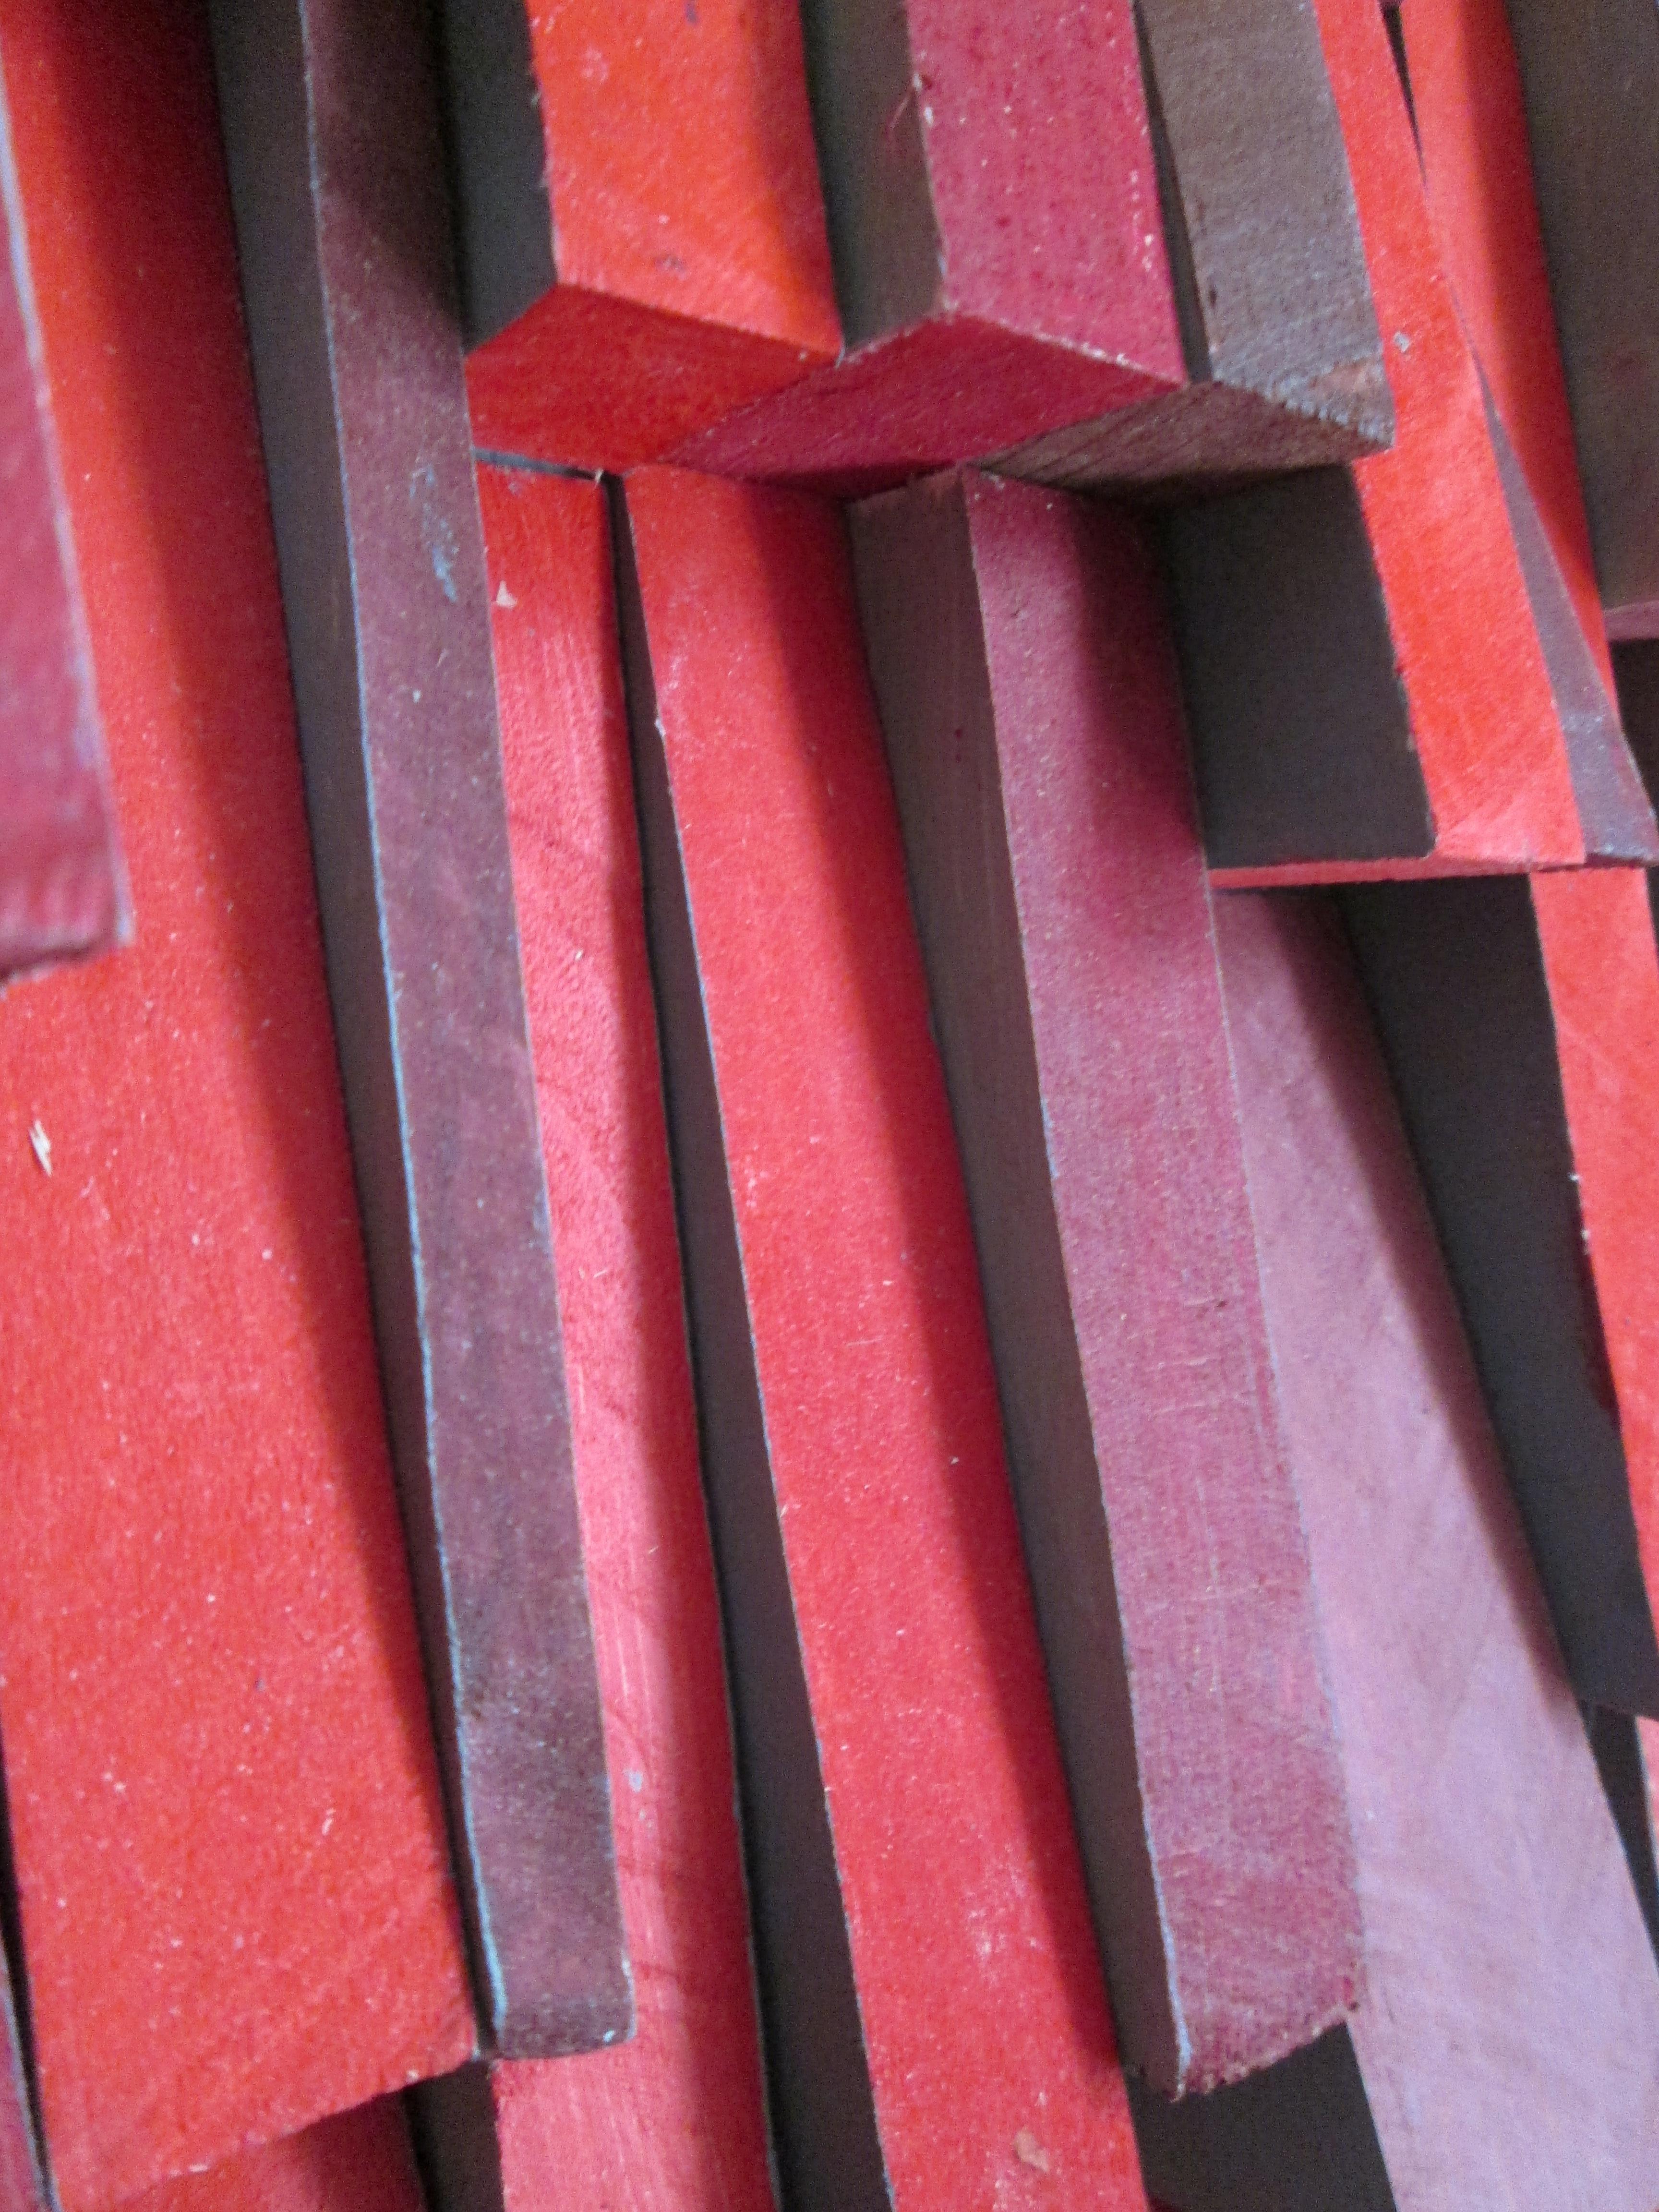 Abstract three dimensional wood wall sculpture in shades of bright red with dark gray painted sides
“Firefall” by Hudson Valley artist, Stephen Walling, made in 2020
Hand carved wood with acrylic paint on panel 
48 x 24 x 3 inches 
Wire backing for